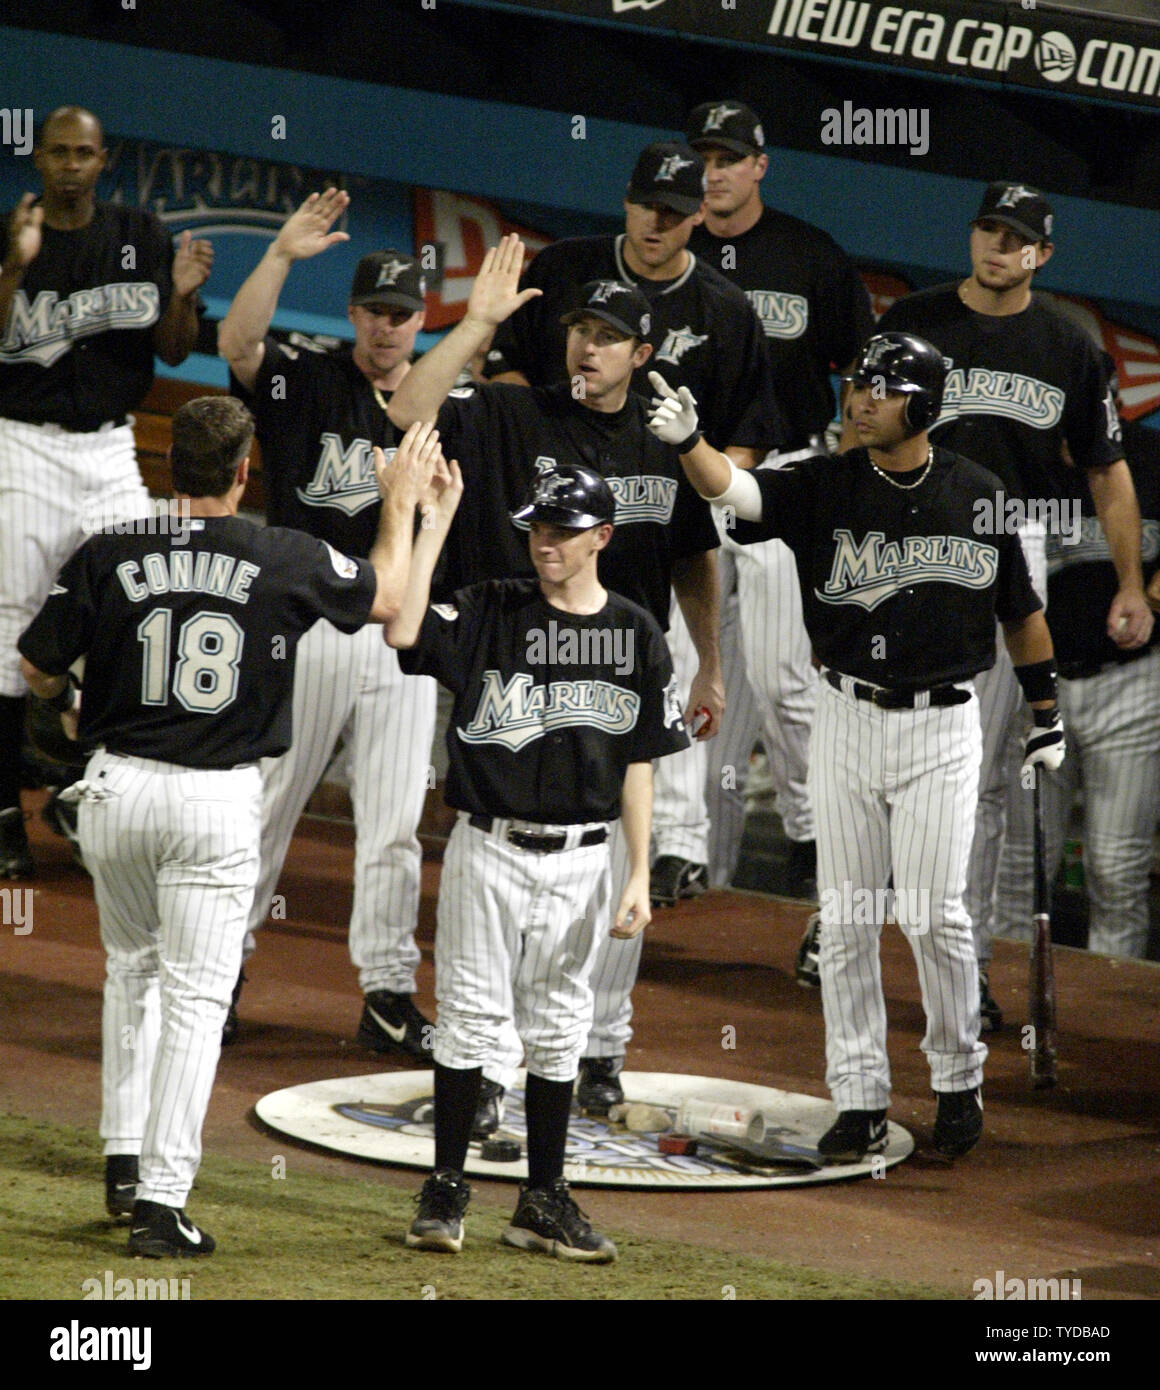 Florida Marlins Jeff Conine(18) celebrates with teammates after scoring in  the 5th inning against the New York Yankees in game 5 of the 2003 MLB World  Series, at Pro Player Stadium, Miami